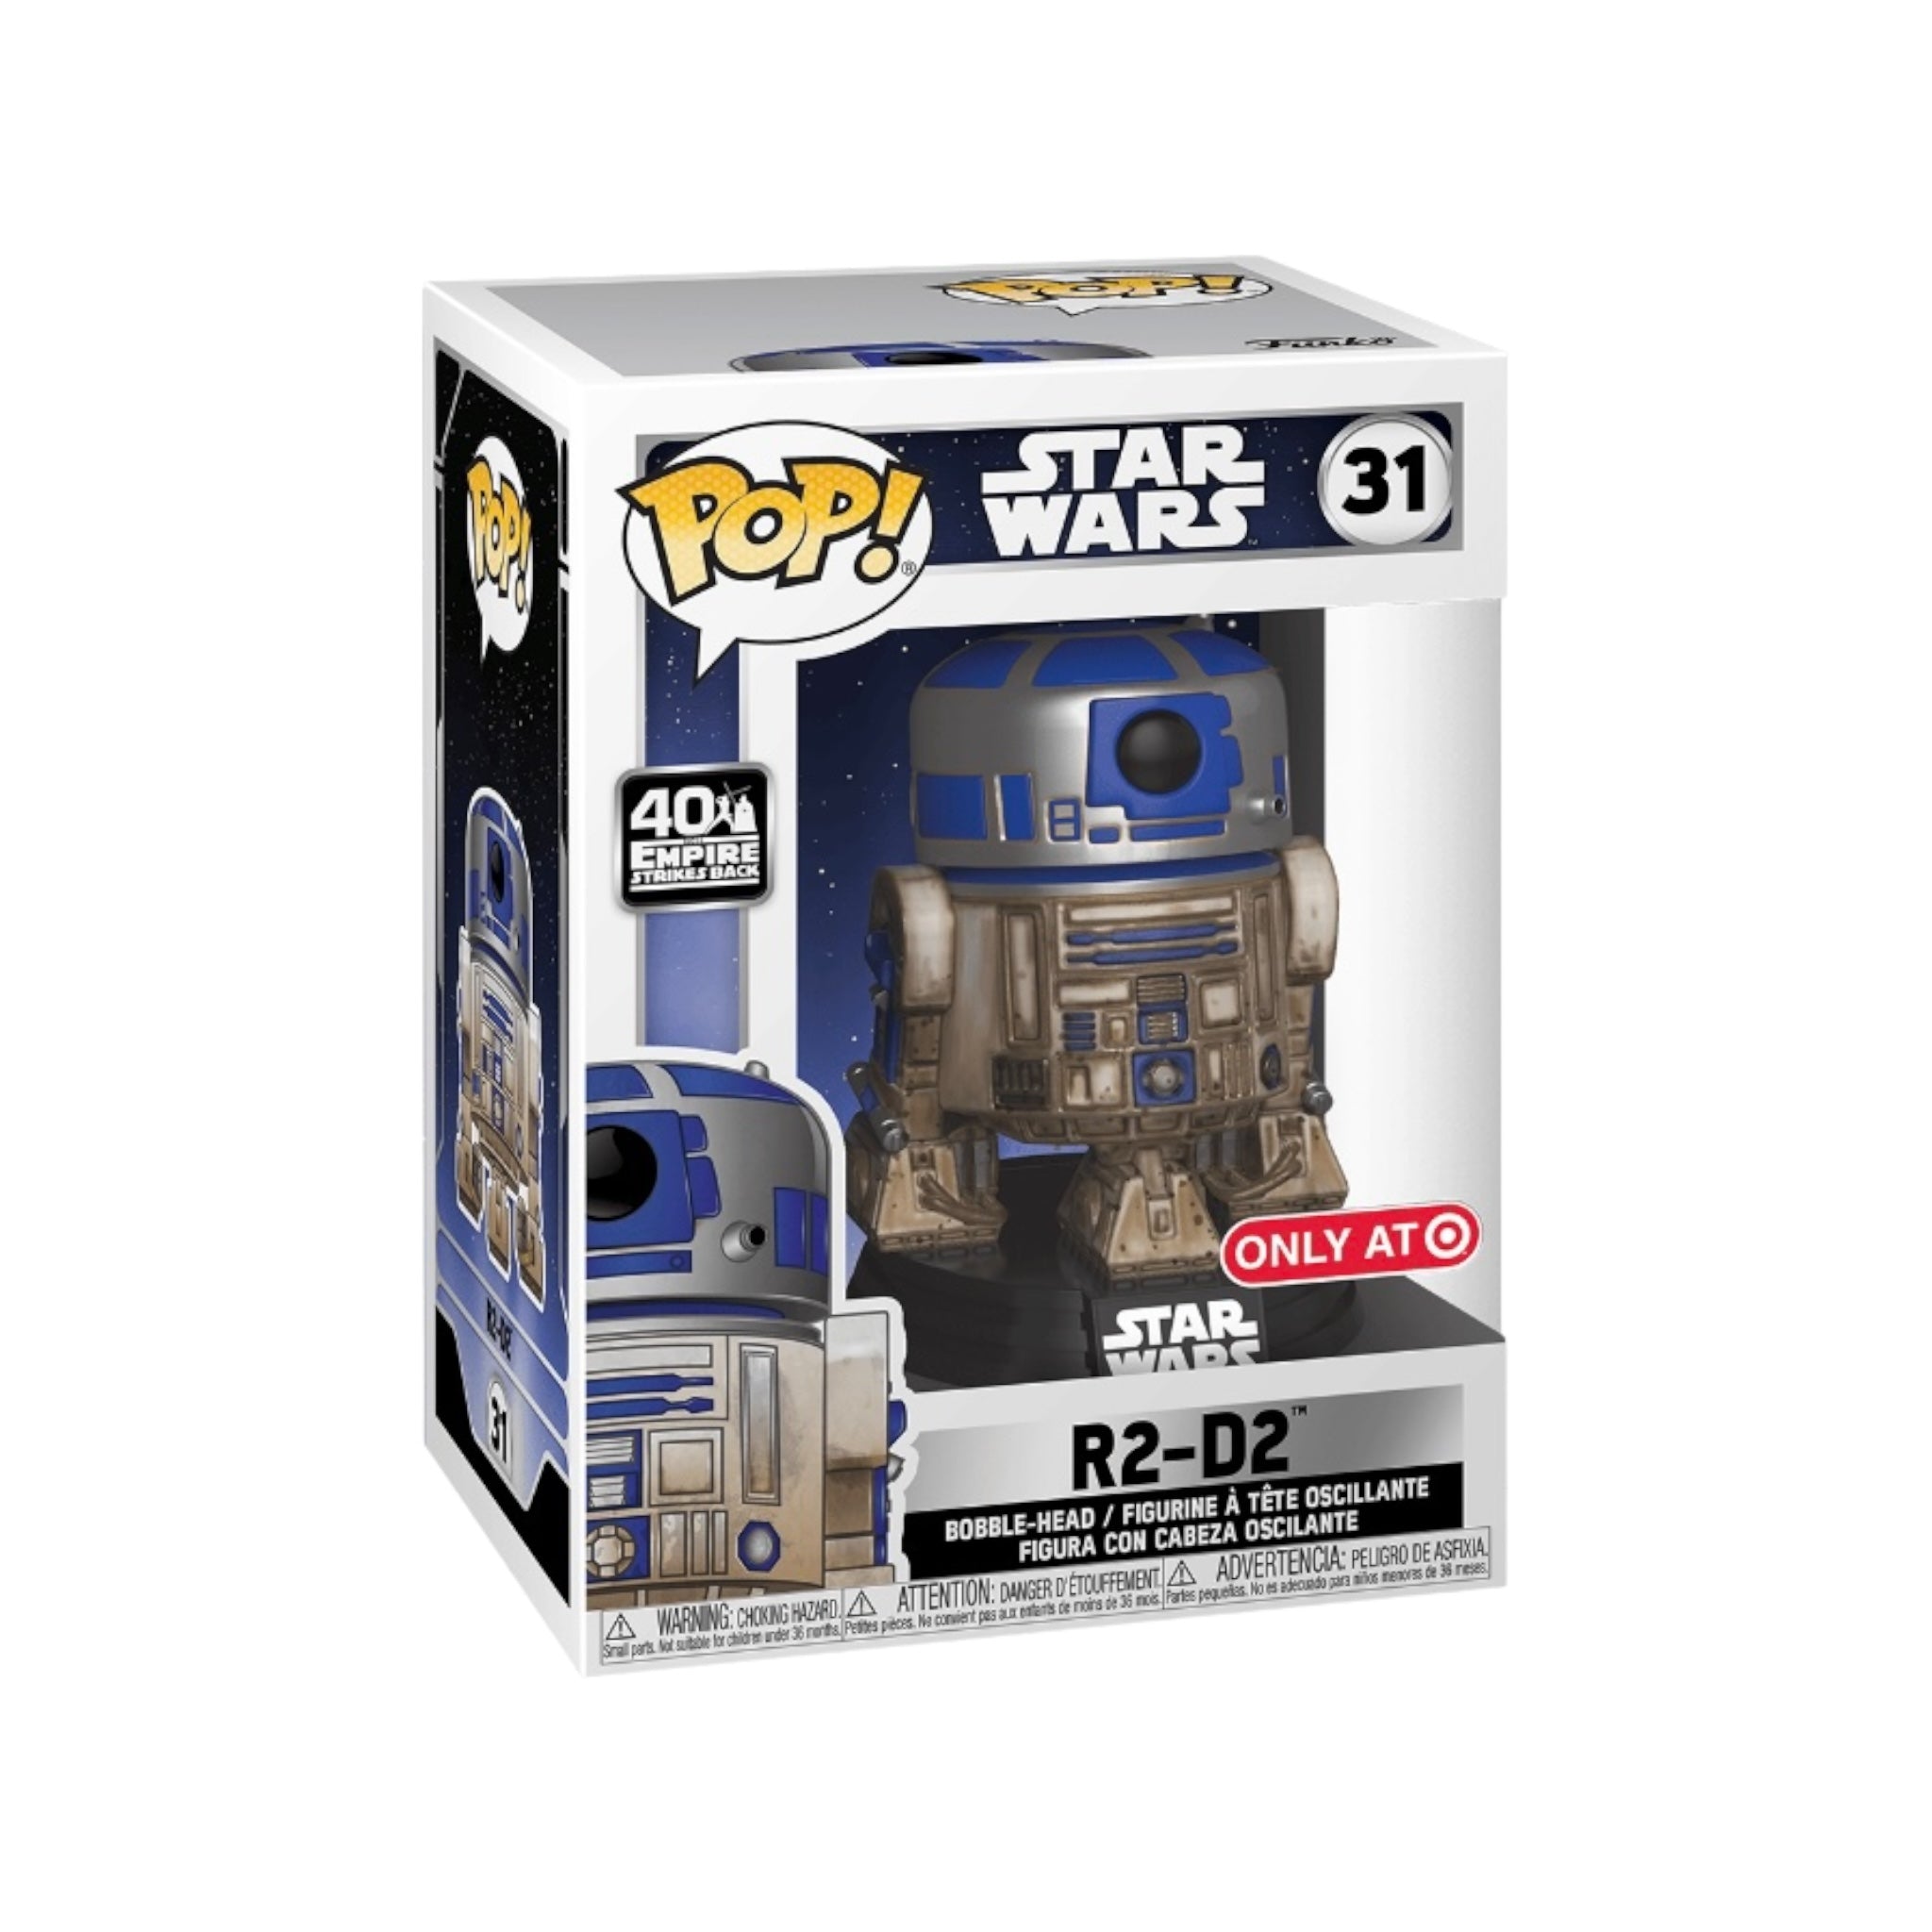 R2-D2 #31 (Dagobah) Funko Pop! - Star Wars: The Empire Strikes Back 40th Anniversary - Target Exclusive